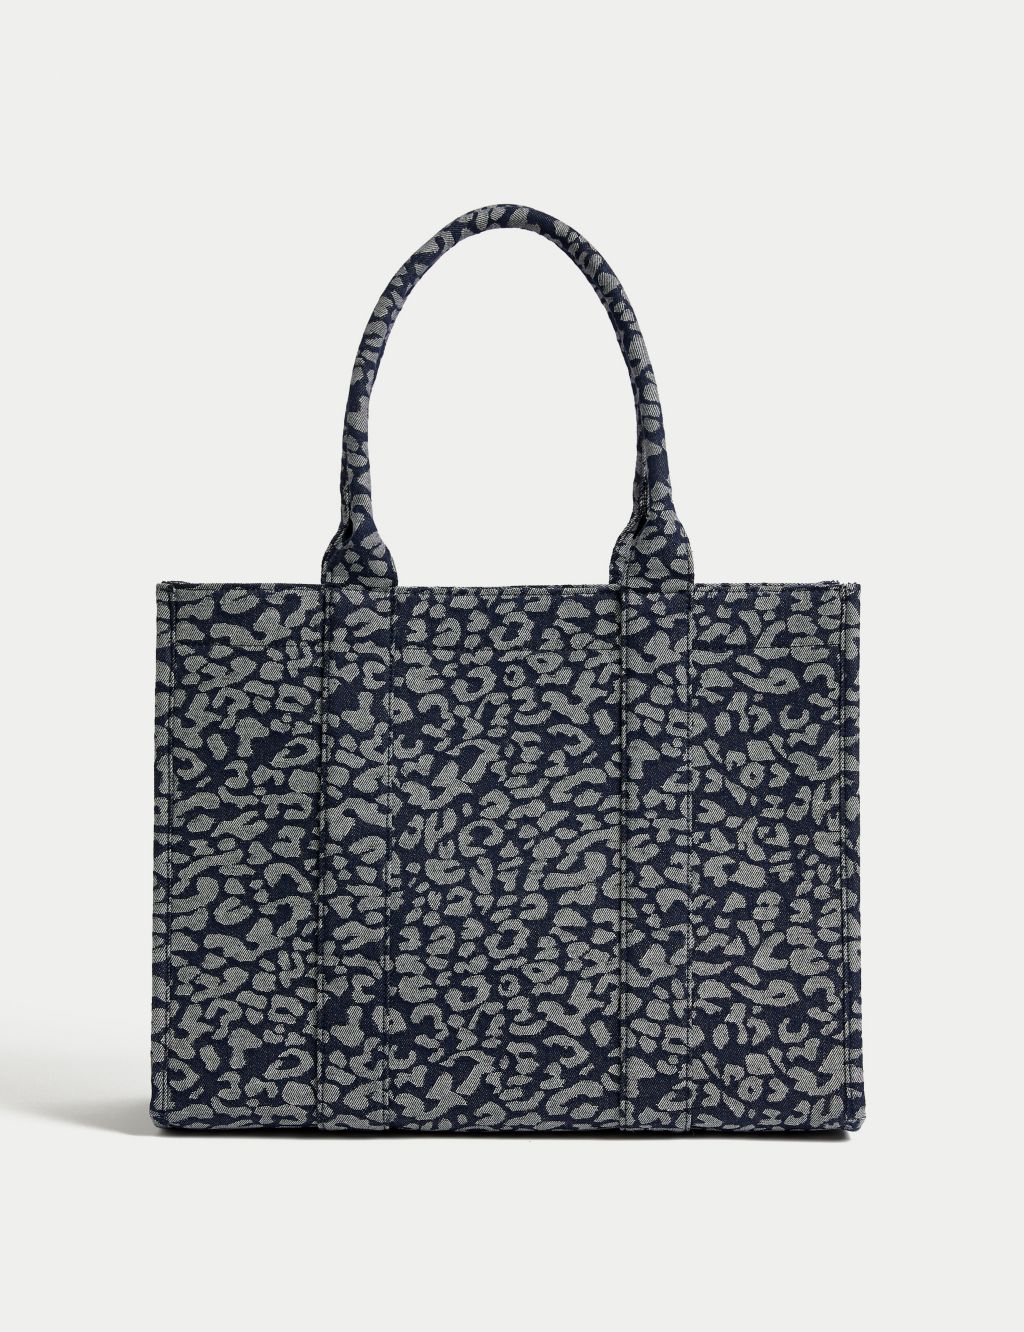 Canvas Structured Tote Bag image 1